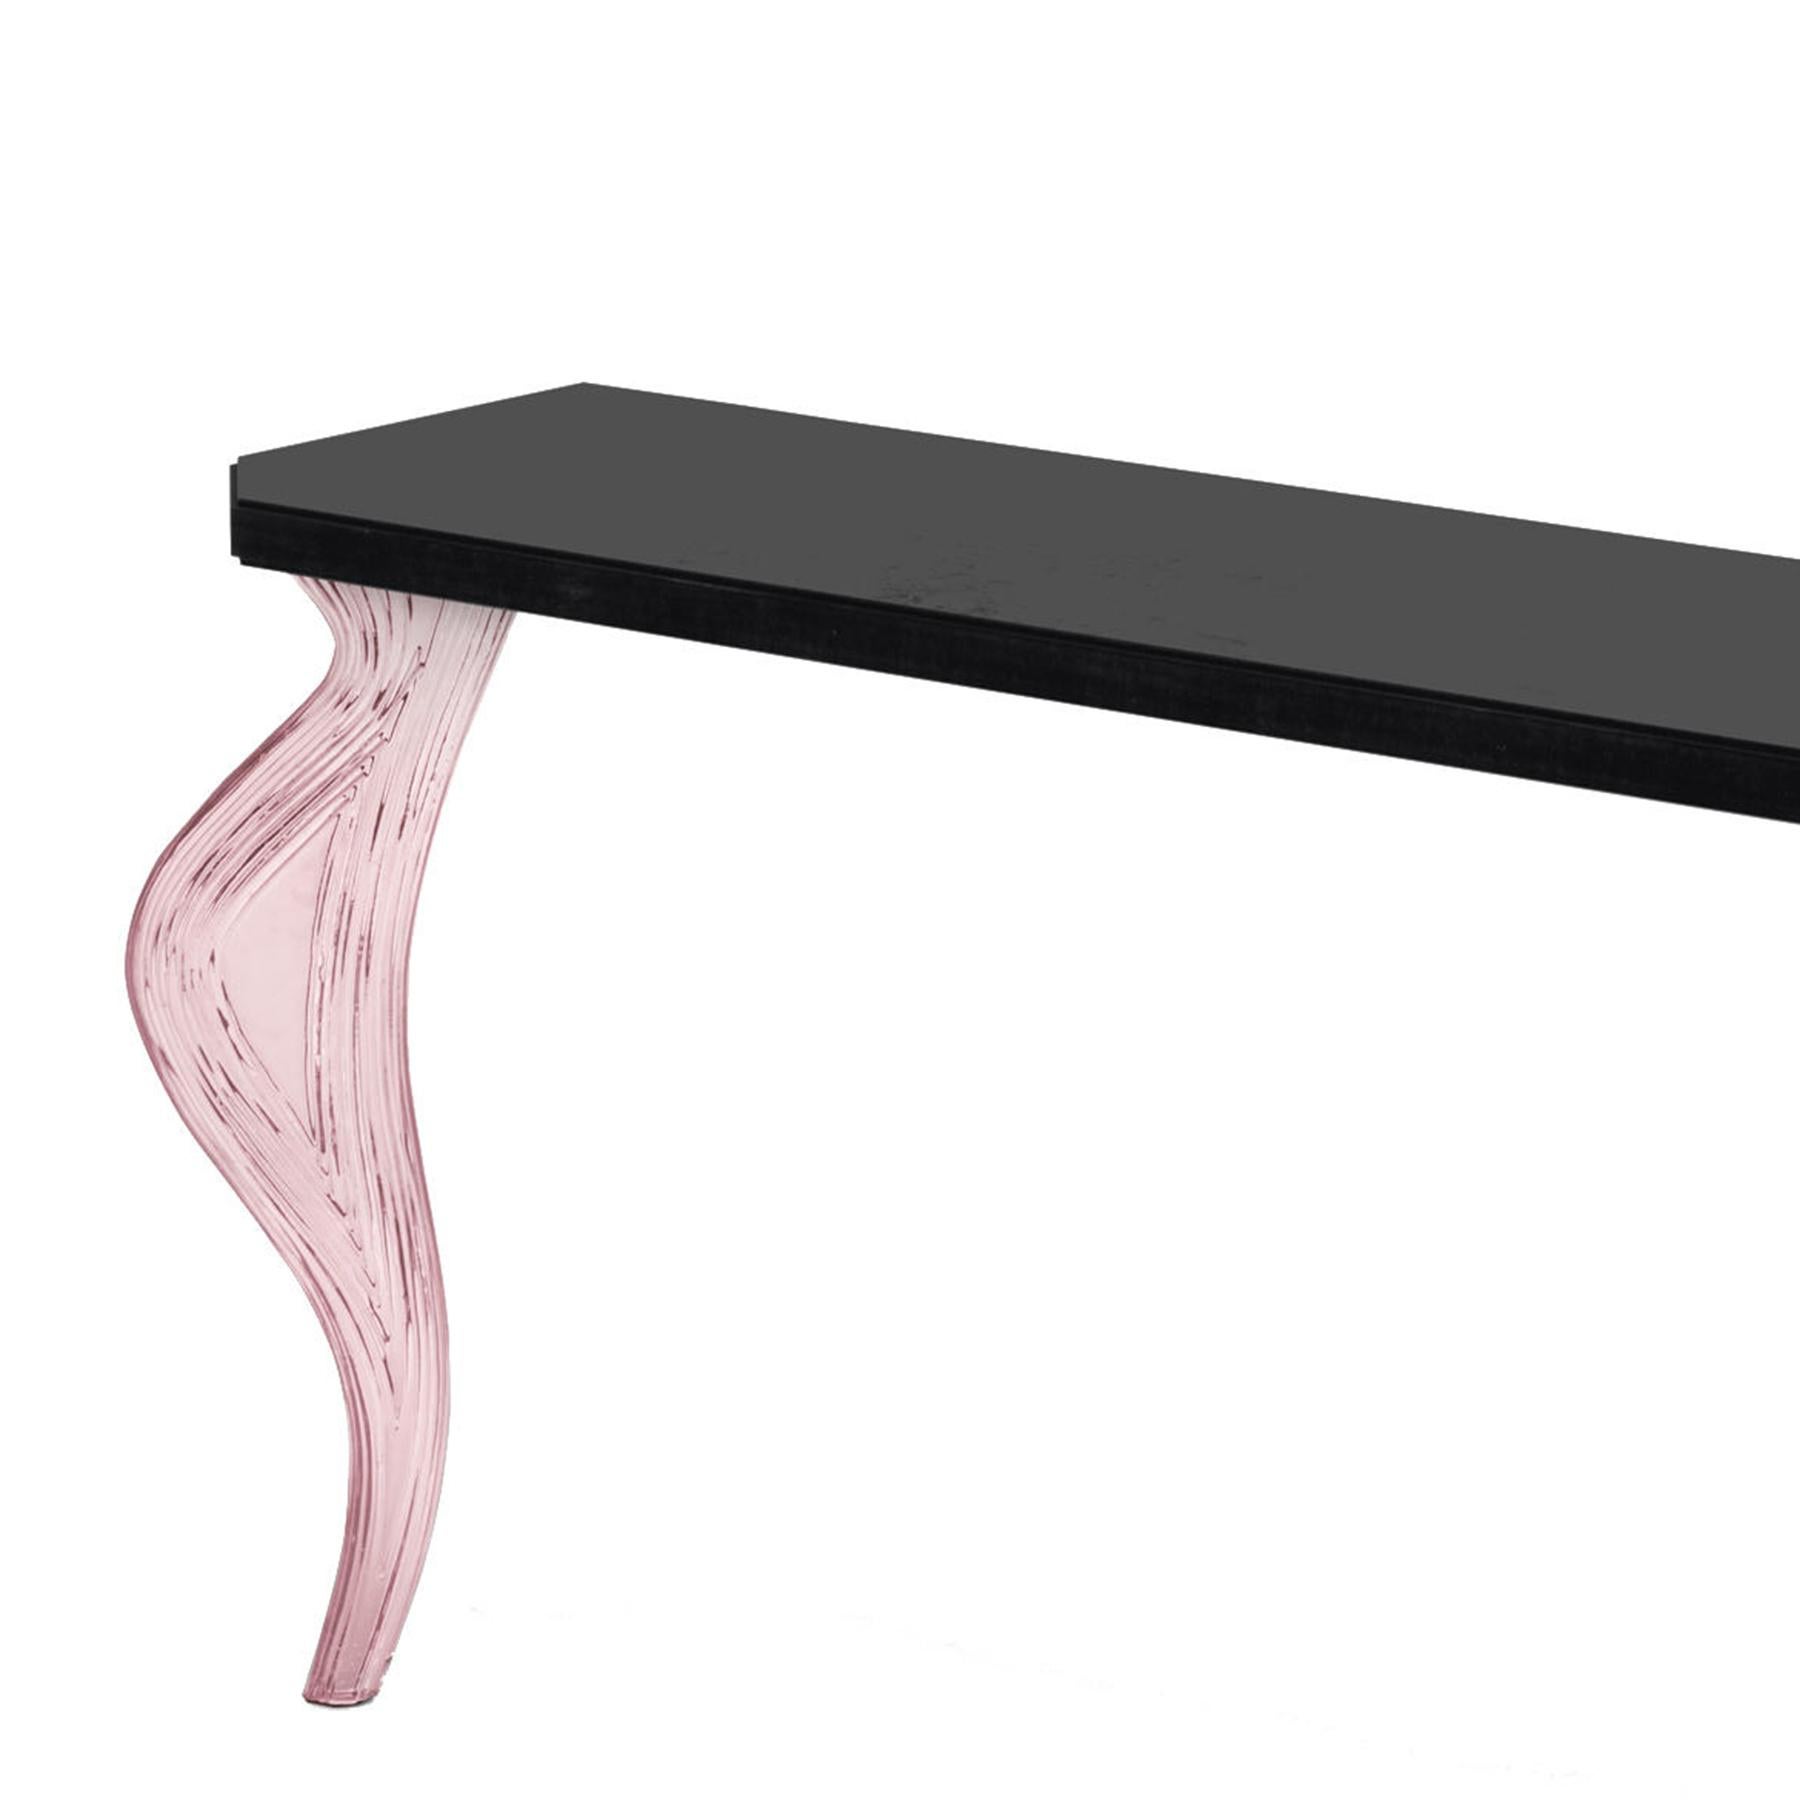 Wall console table Sillage rose with solid wood top
in black gloss lacquered finish. With 2 feet in extra light
fused glass in rose finish.